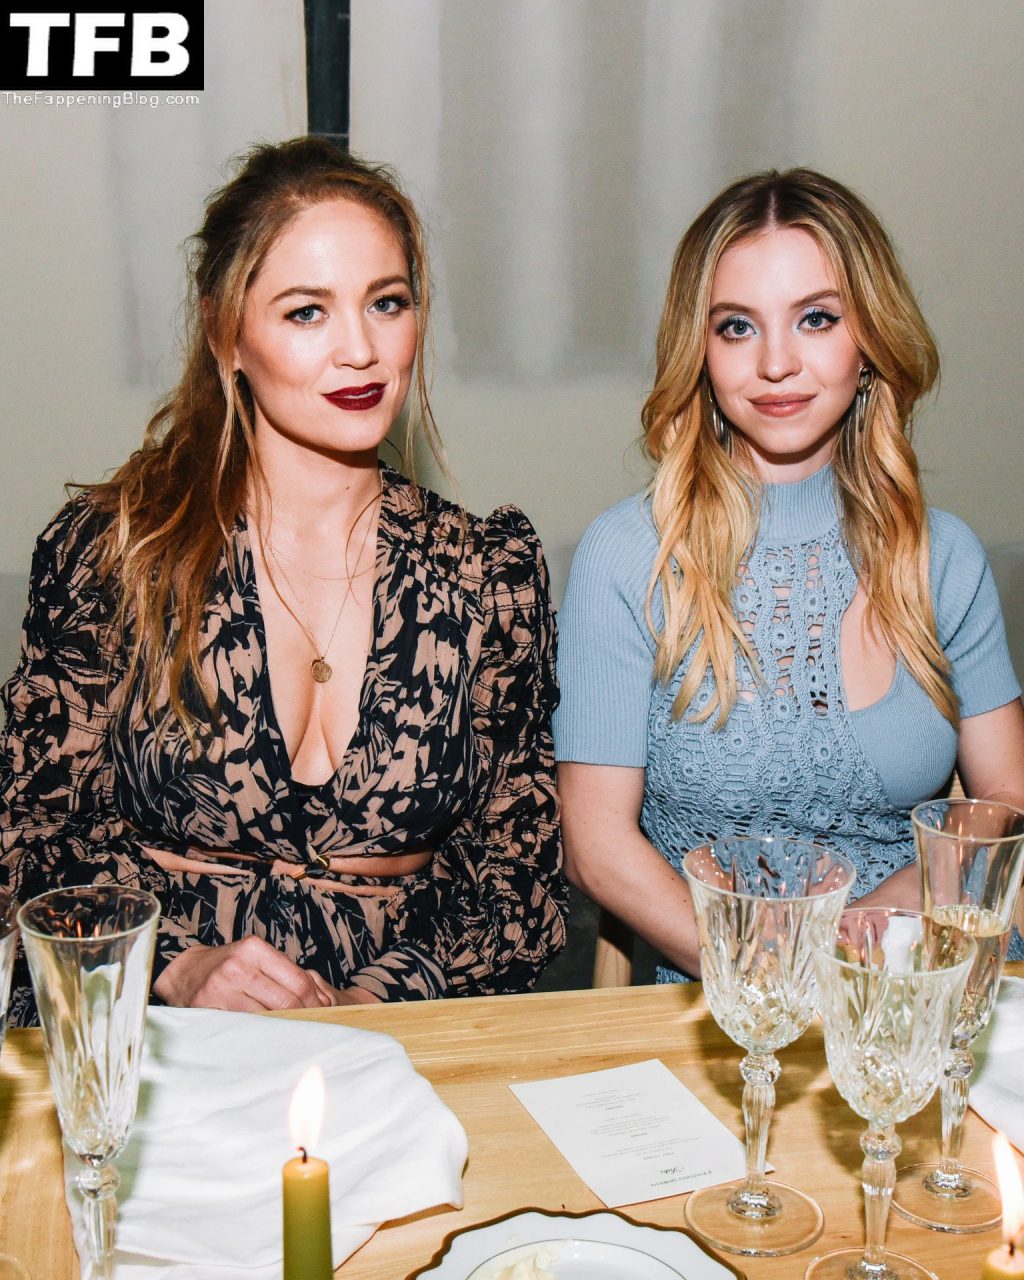 Sydney Sweeney is Pictured at Jonathan Simkhai x Saks Fifth Avenue Cocktail &amp; Dinner Party (24 Photos)